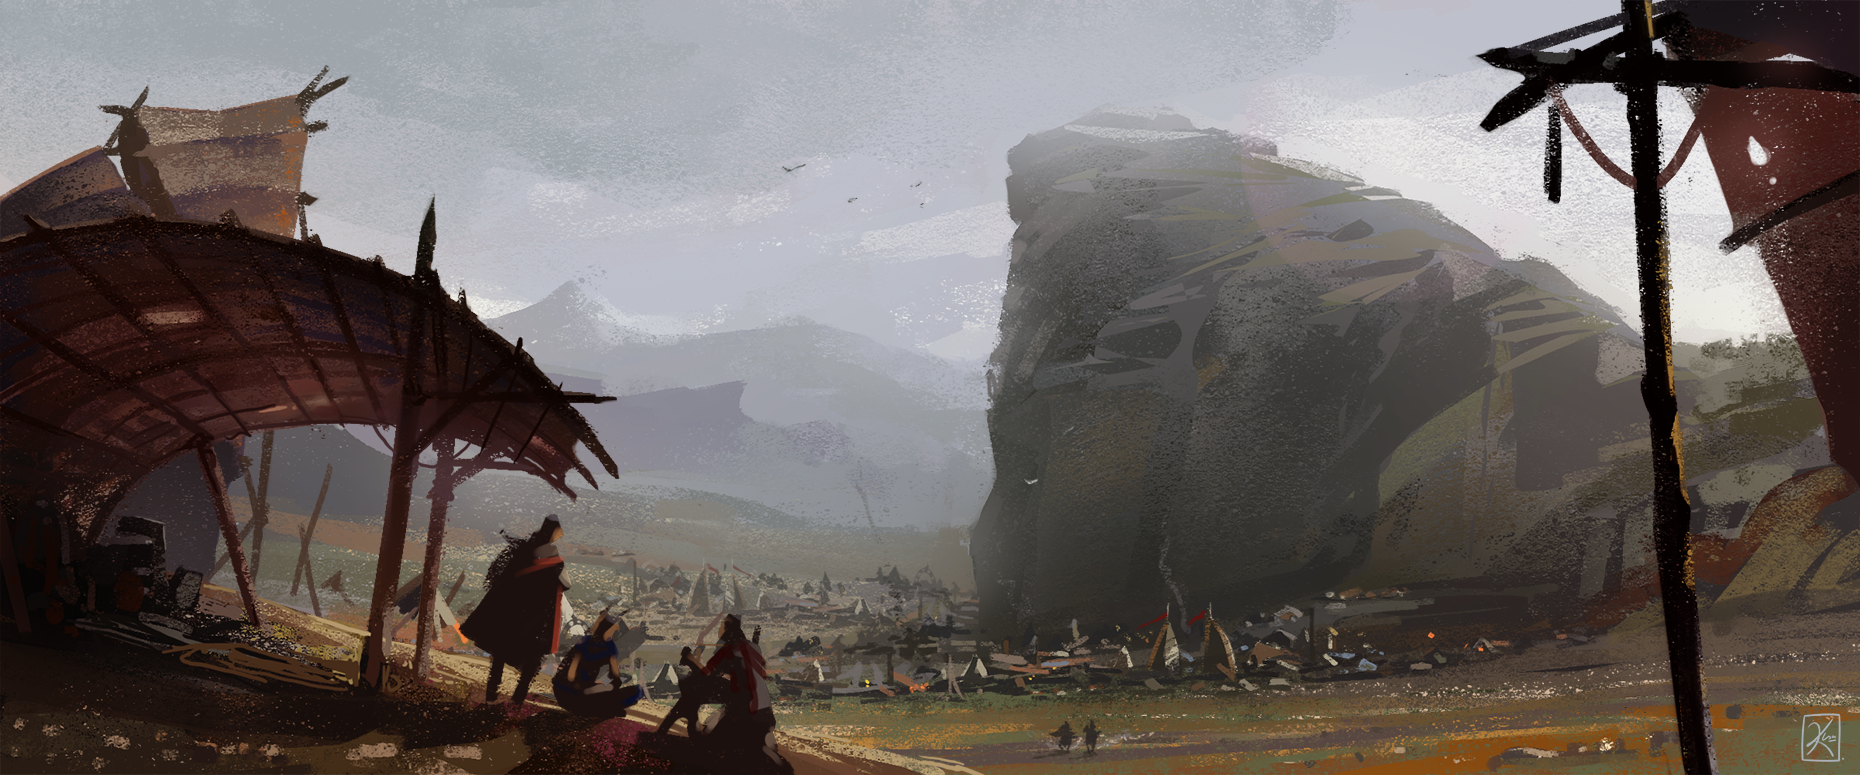 In the distance we see a city at the foot of a large half-domed cliff below a grey overcast sky. A group of nomadic travelers is relaxing in the foreground.